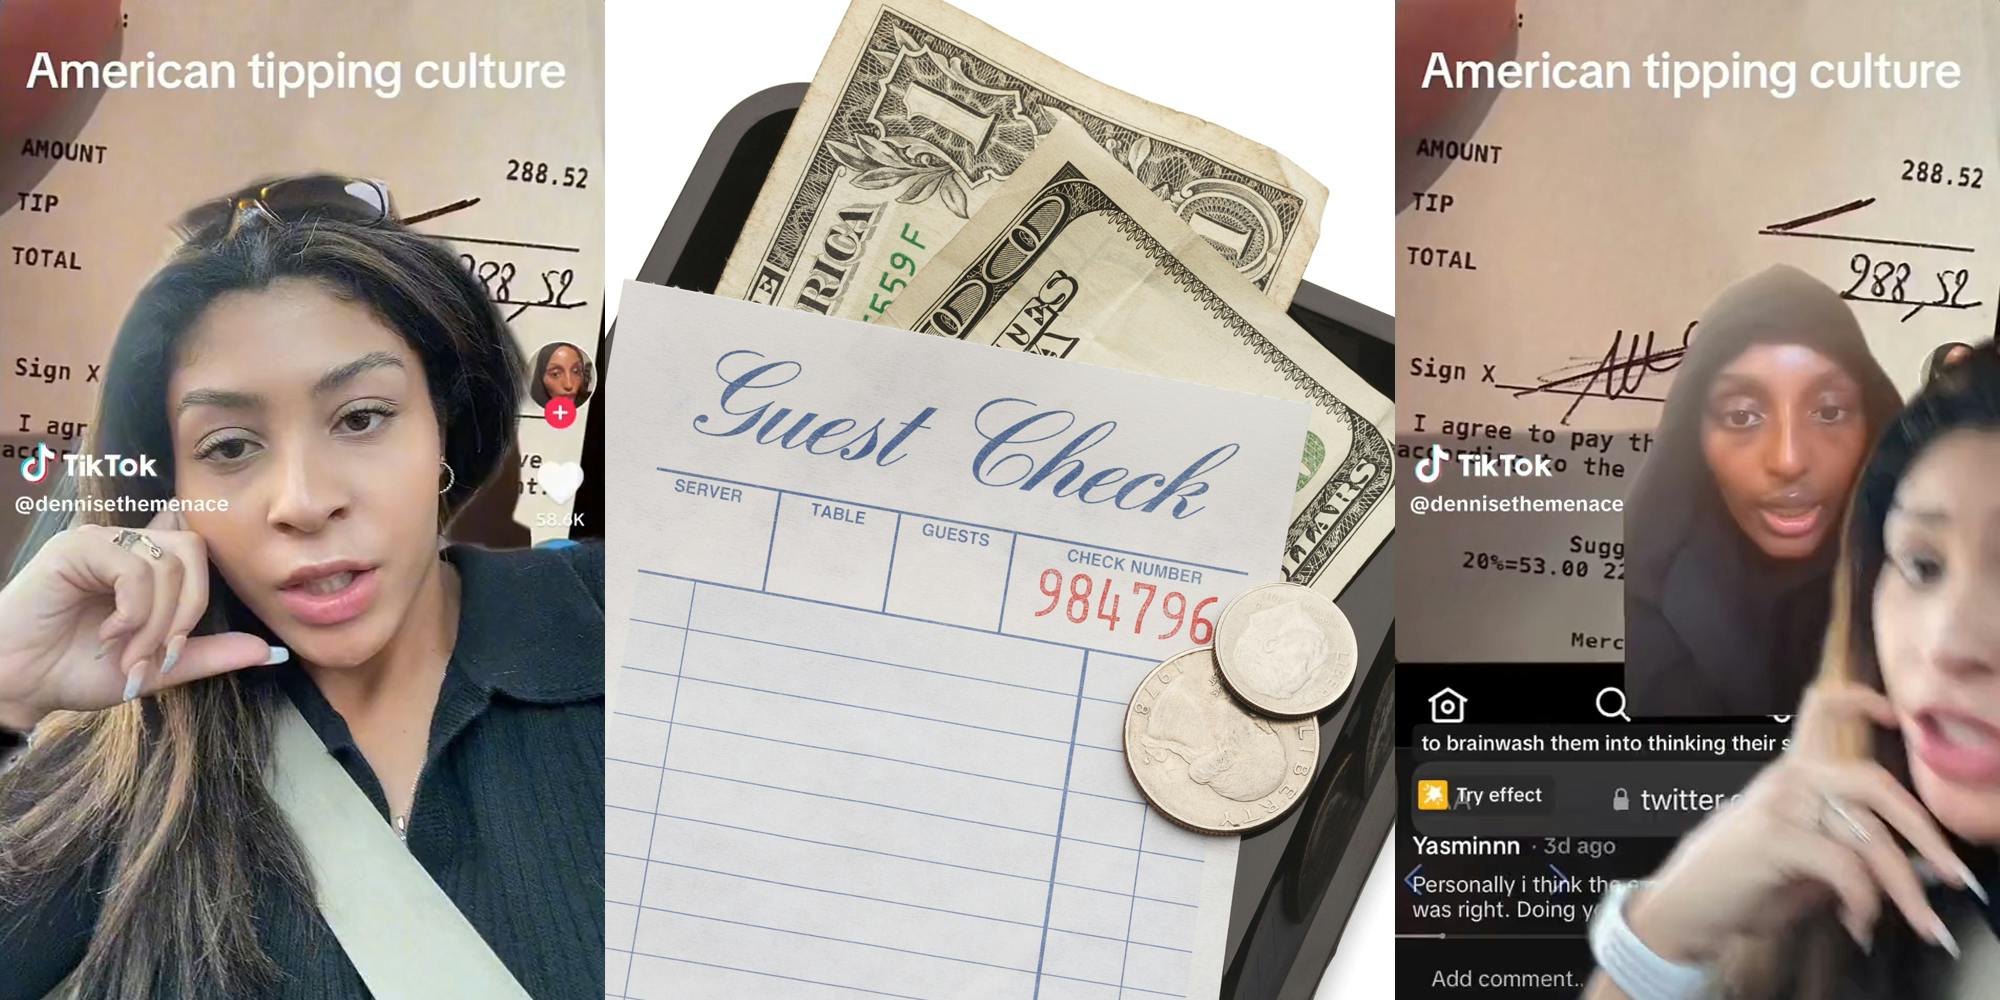 woman with caption "American tipping culture" (l&r) guest check (c)